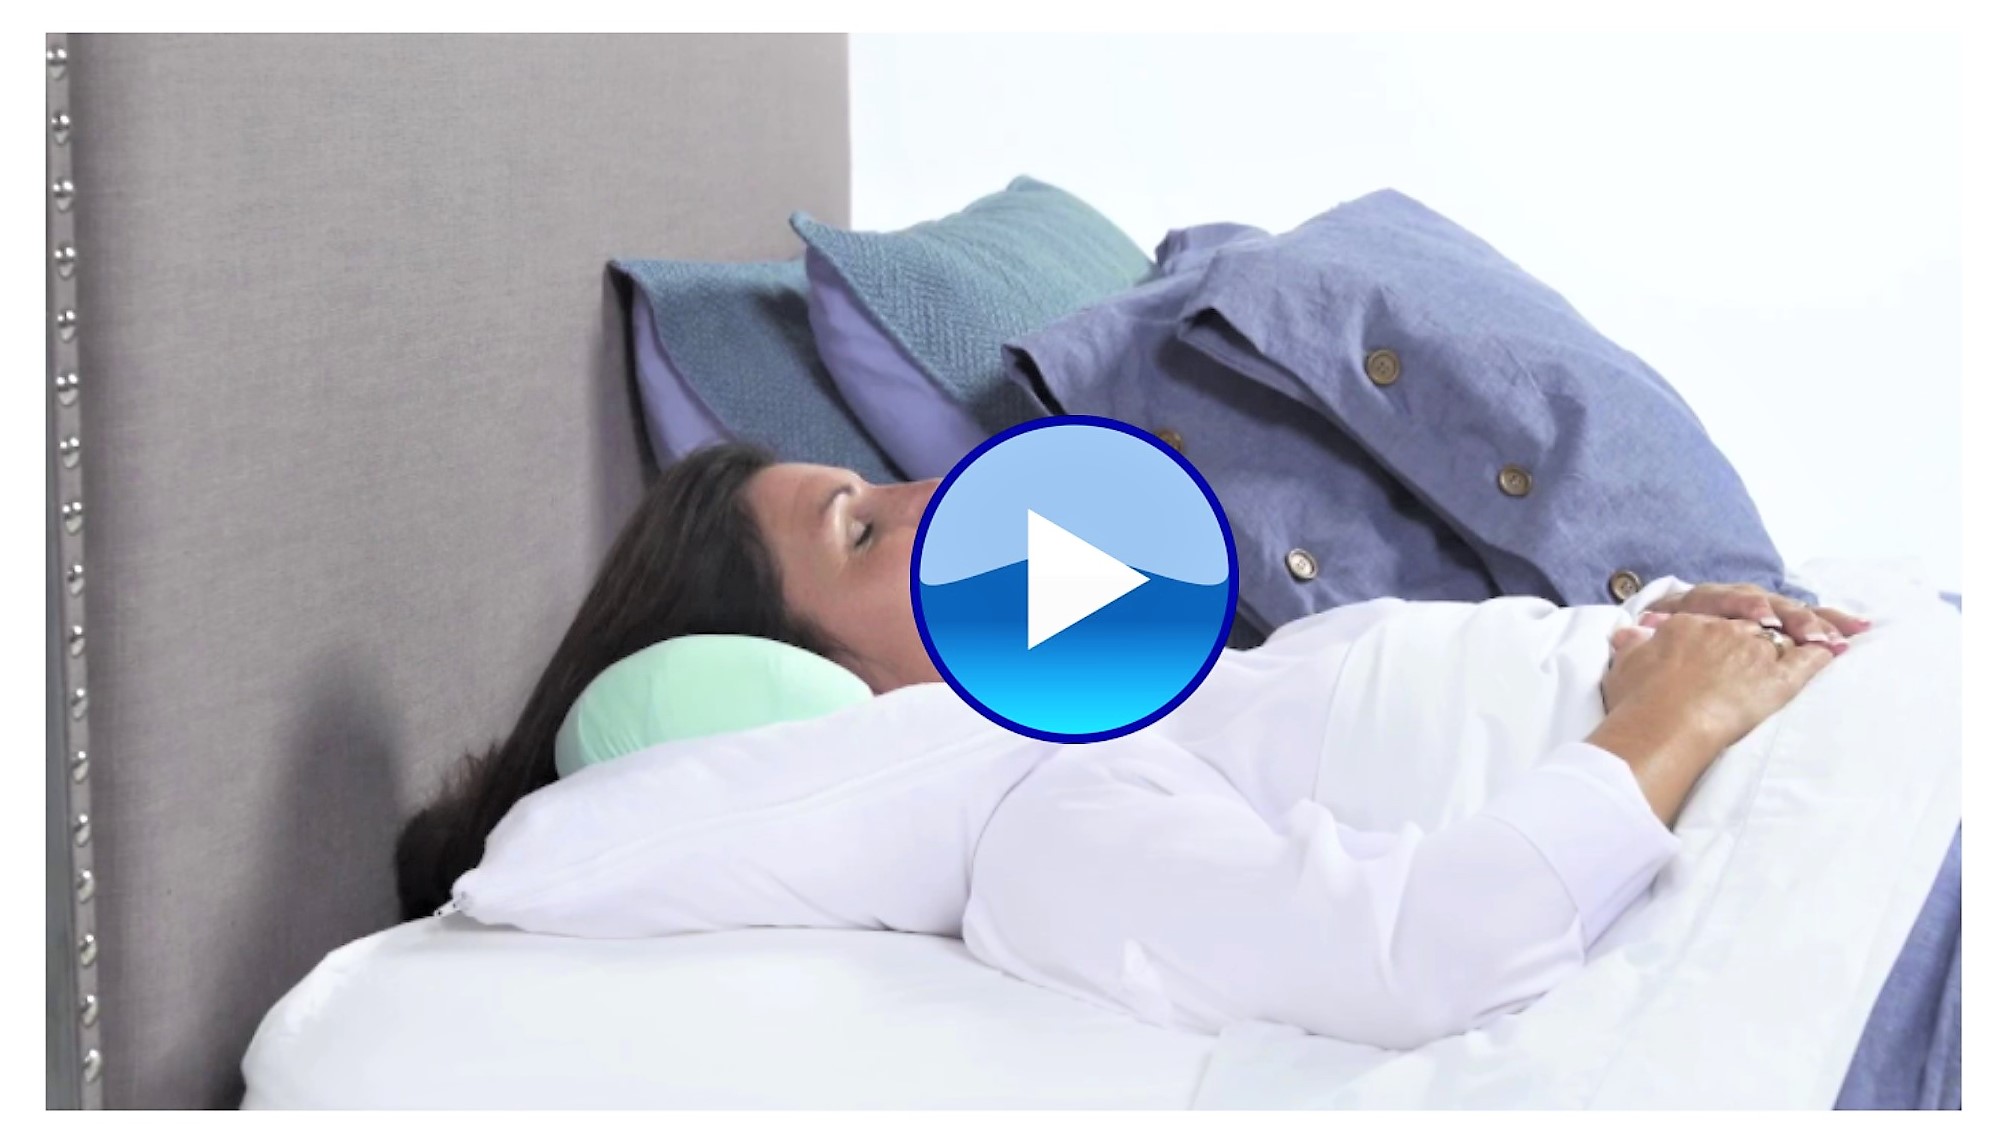 The patented Back to Beauty™ Anti-Wrinkle Head Cradle wrinkle-preventing beauty sleep pillow provides exclusive back sleeping protection against giving yourself facial acne, wrinkles, jowls, and bags under your eyes, as well as chest and breast wrinkles.